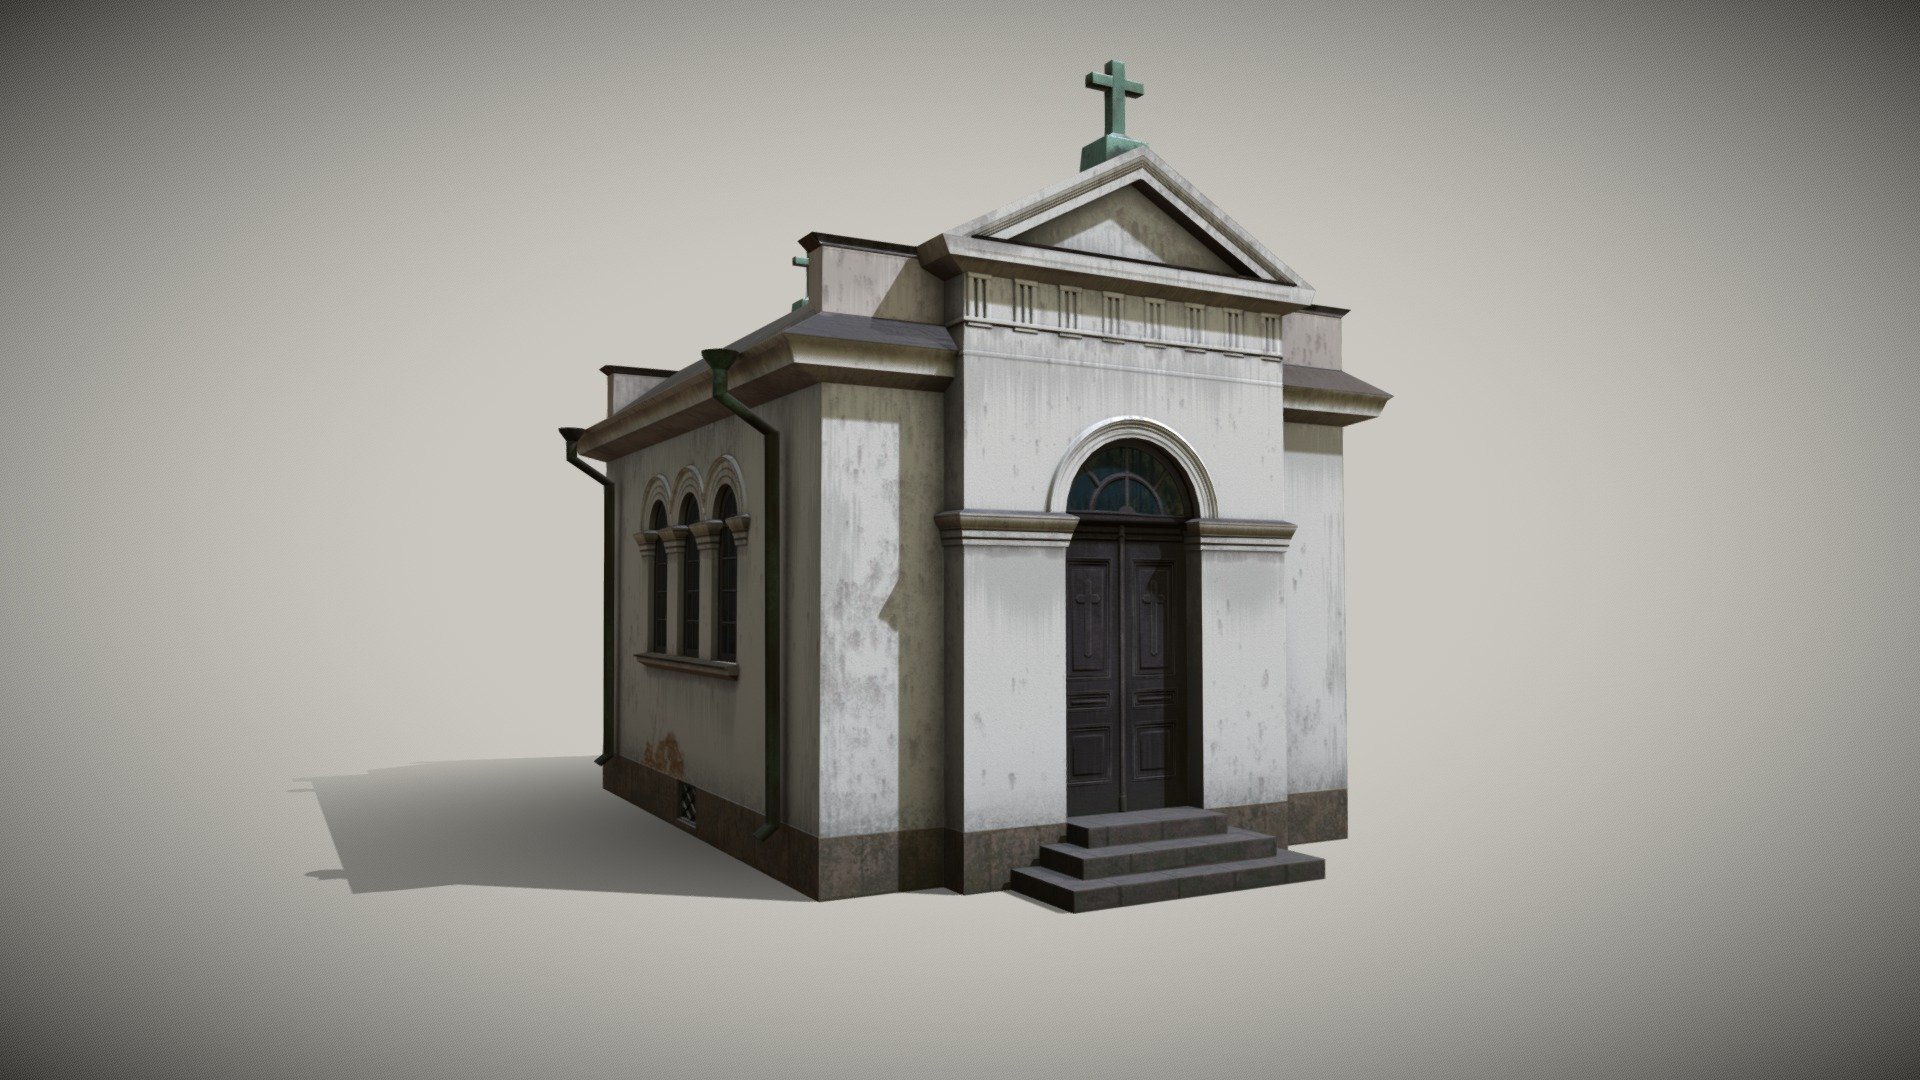 lowpoly pbr textured chapel - inspiration was a building near Adolf Frediks kyrka, stockholm.

lowpoly modeled in 3dsmax, textured in substance painter 3d model